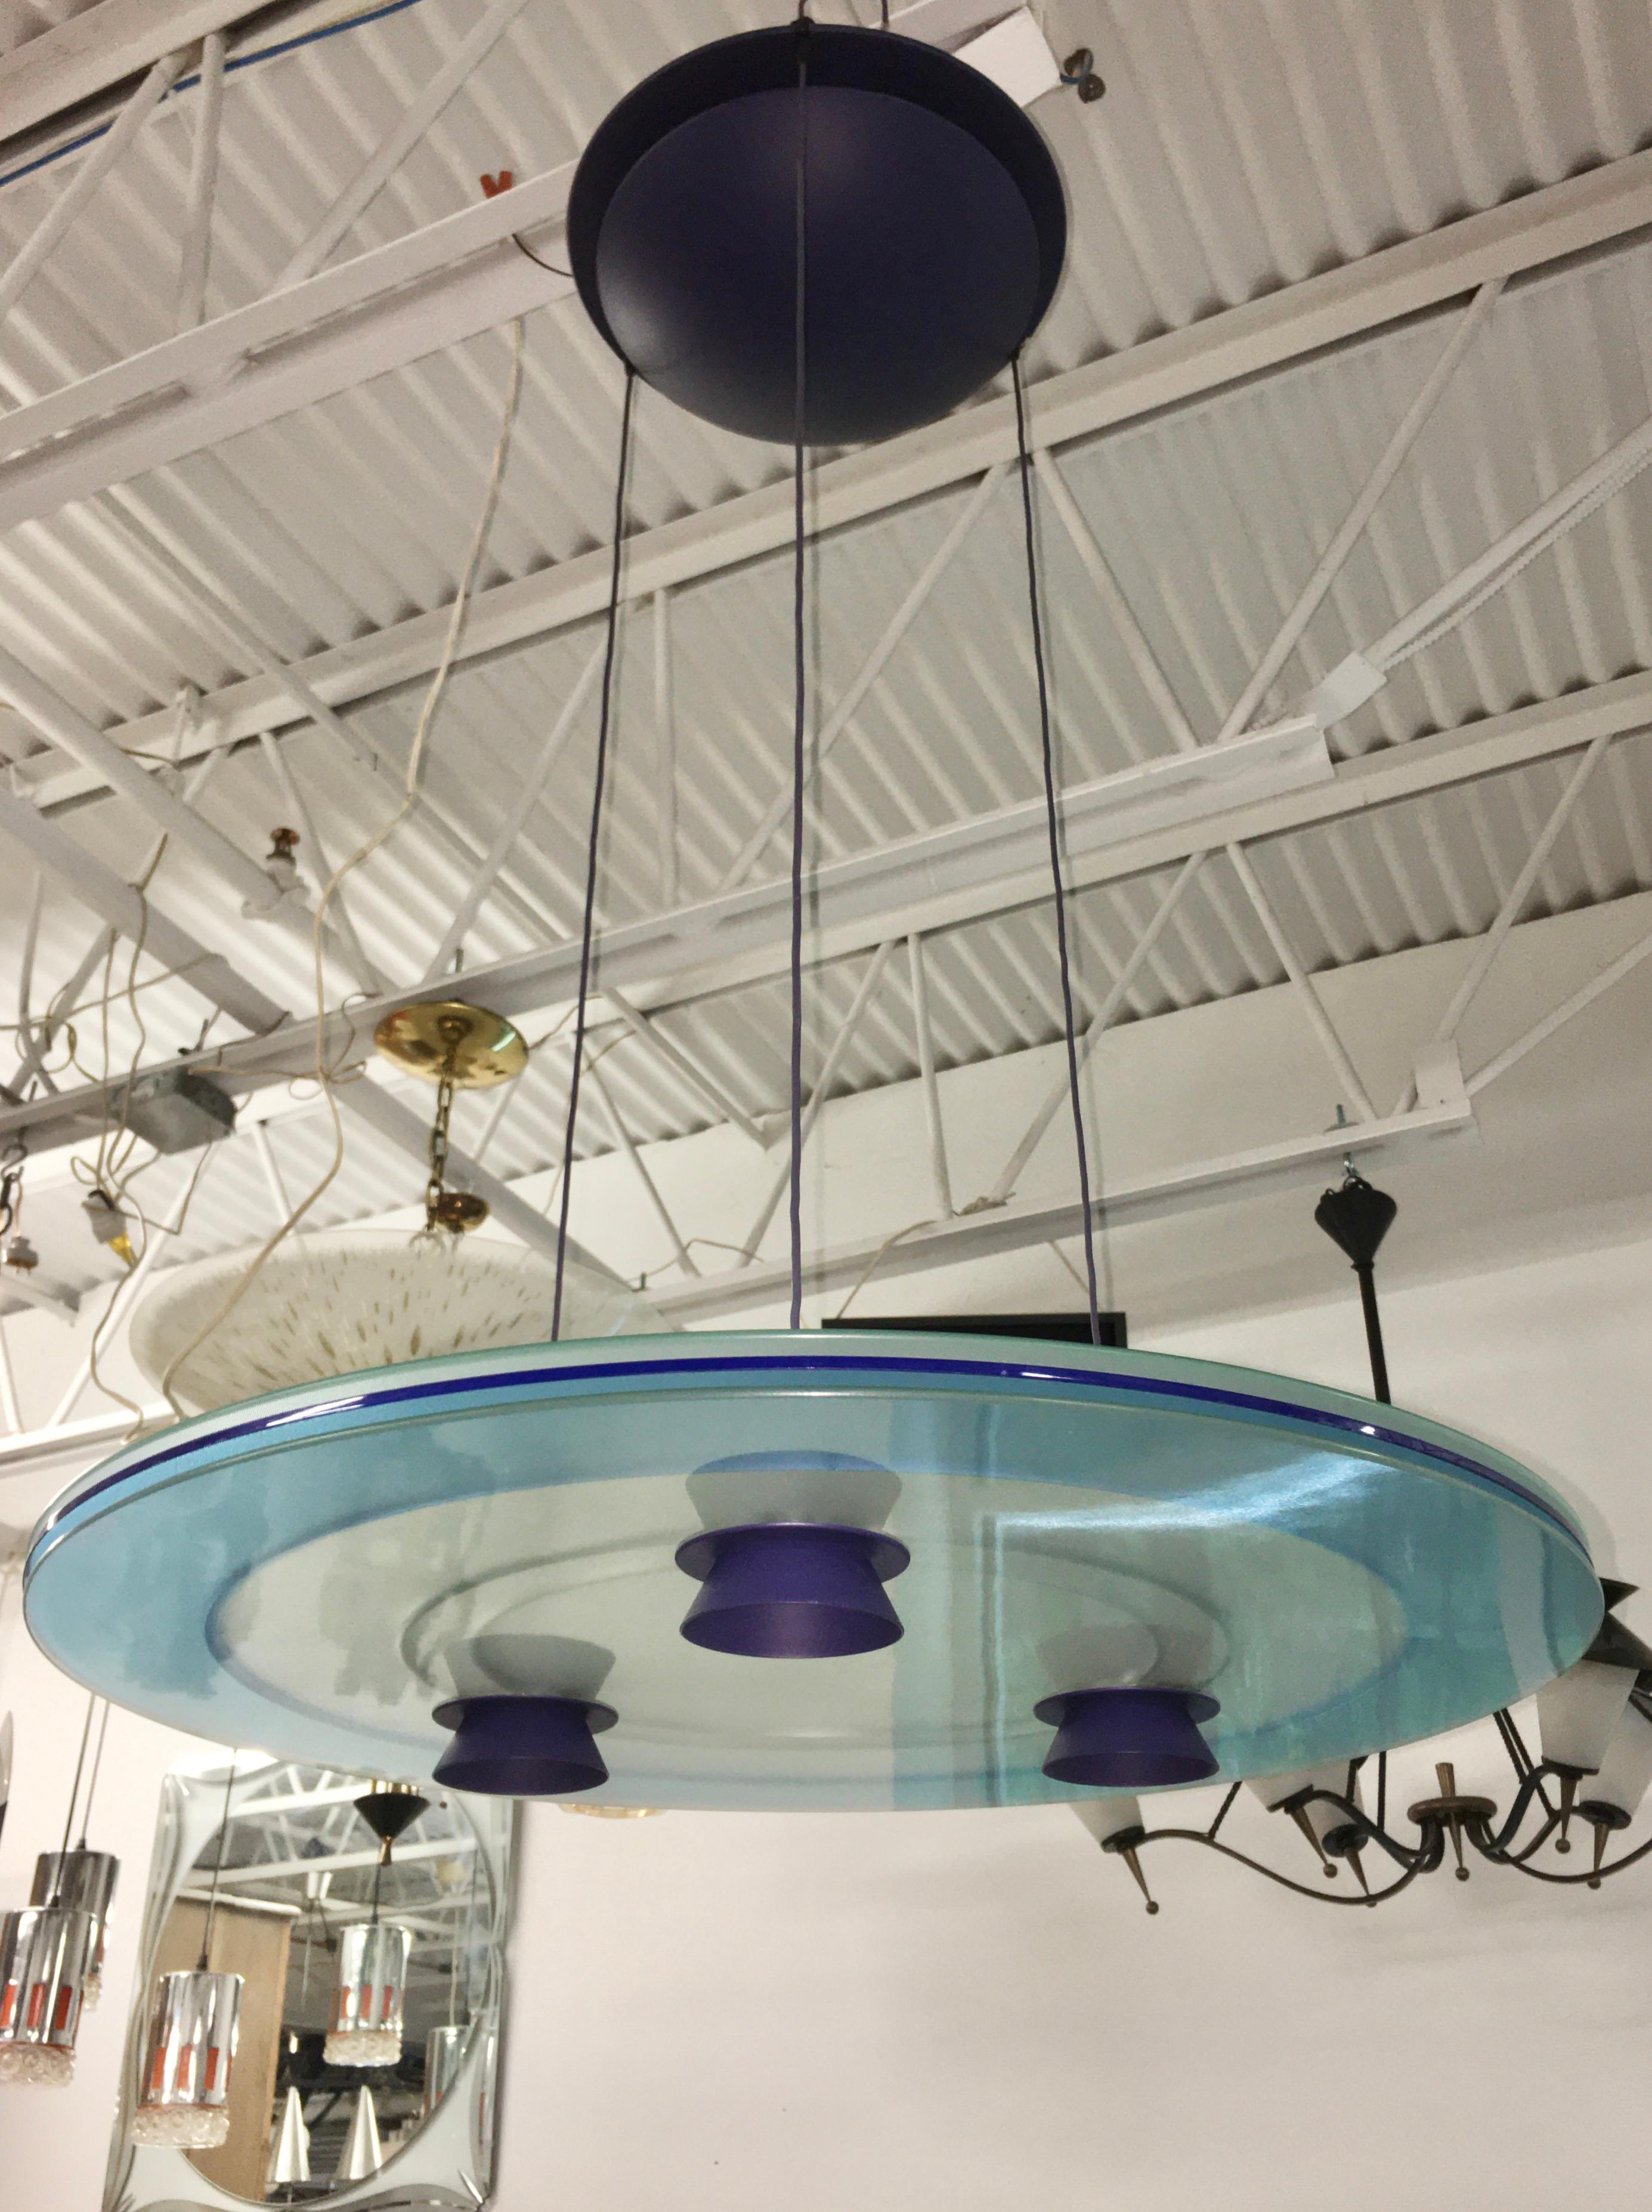 Blue Aurora pendant.
Perry King and Santiago Miranda designed the 'Aurora' pendant light for Arteluce, by then a division of Flos.
The Aurora provides direct and diffused light with three 50 W halogen spotlights from a suspended disk comprised of a